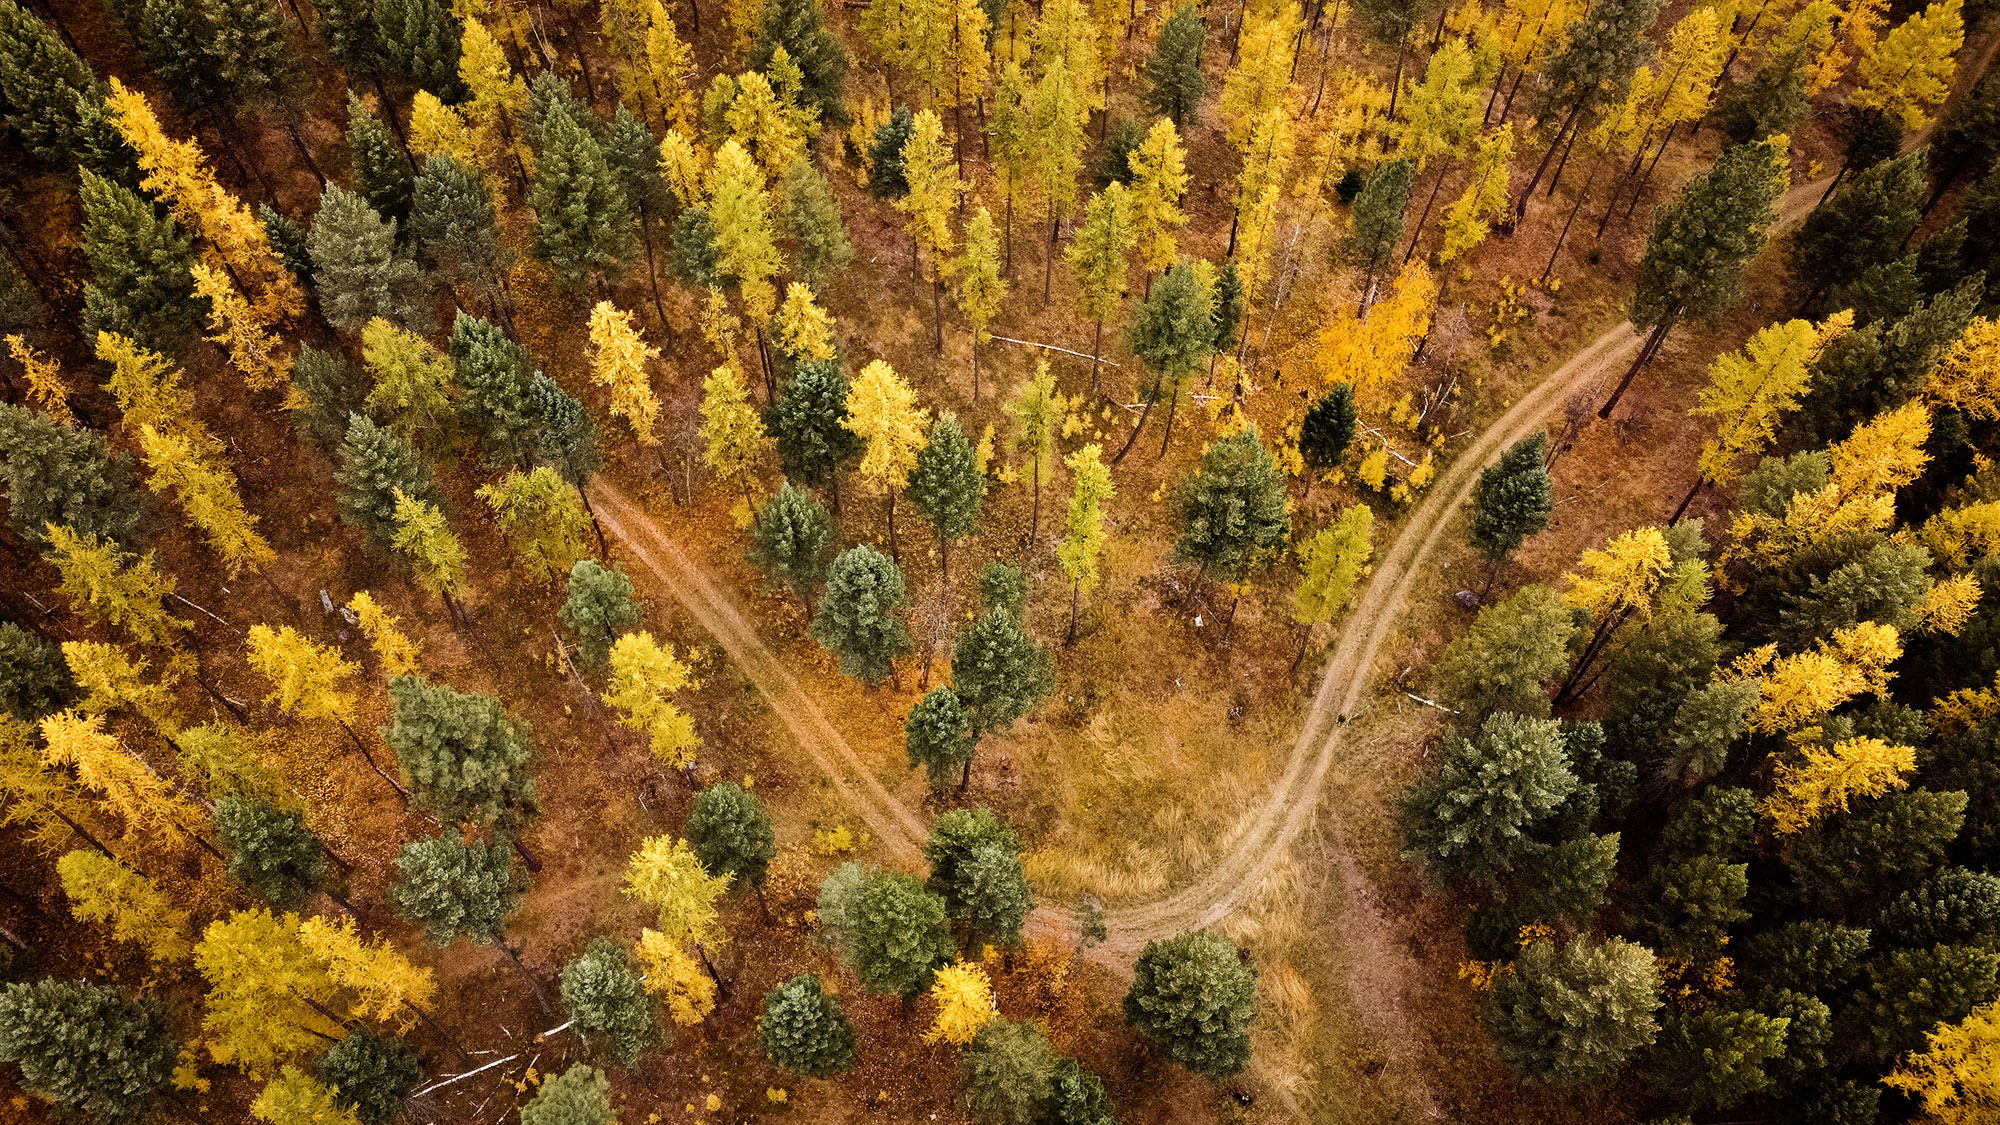 An aerial view of a dirt road in a forest.